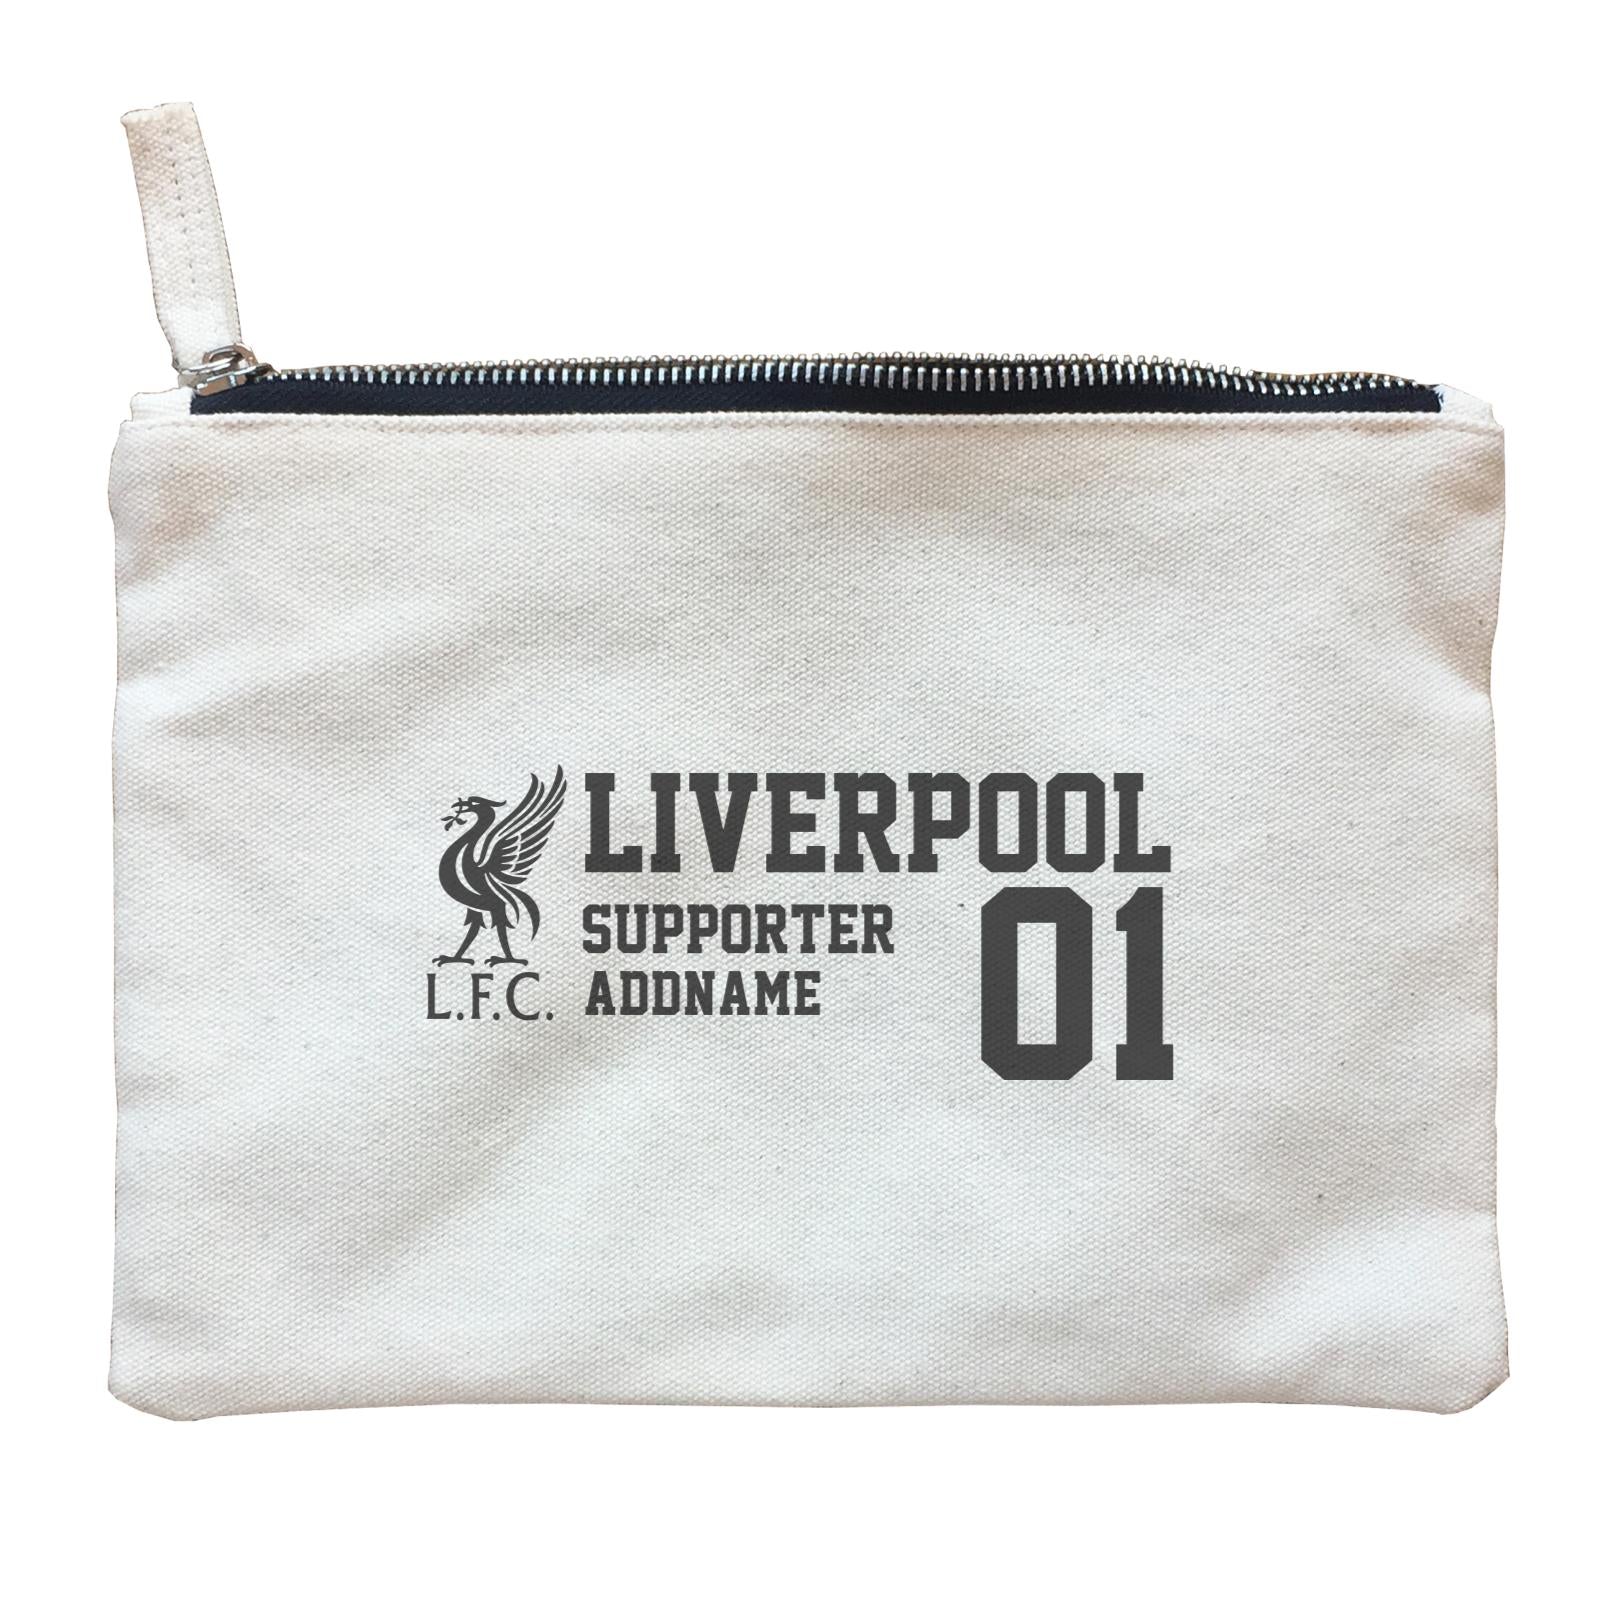 Liverpool Football Supporter Accessories Addname Zipper Pouch